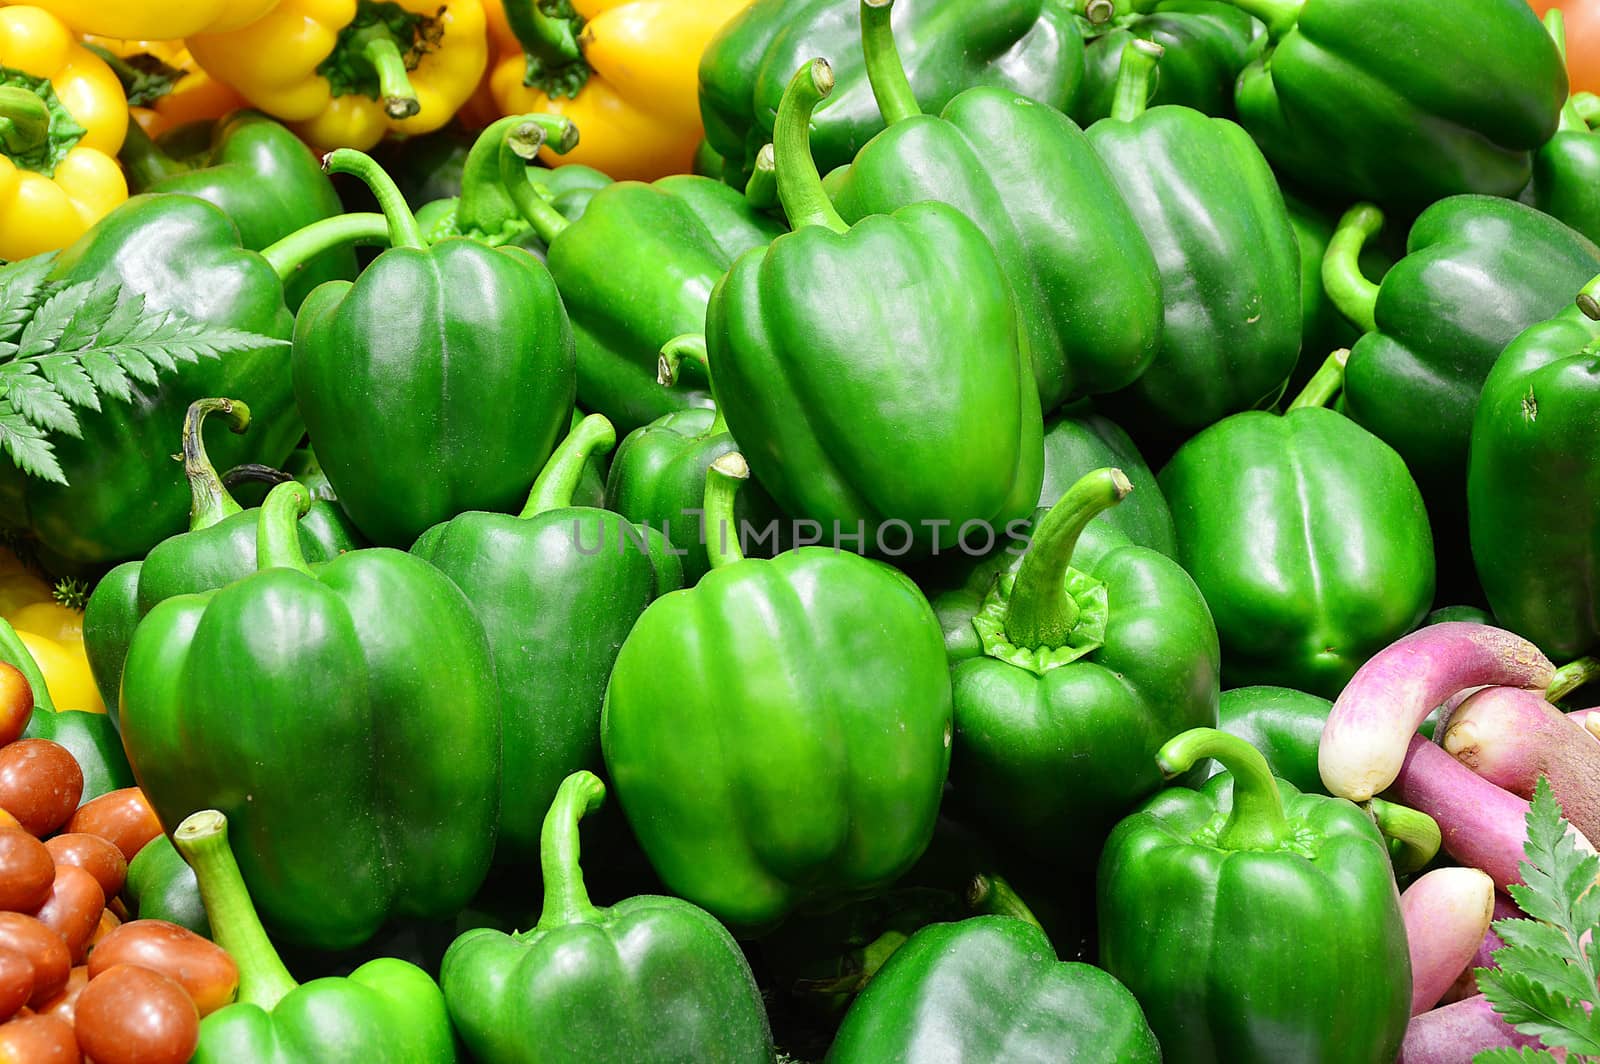 ripe Yellow and Green Peppers in Vegetables Market by Lekchangply